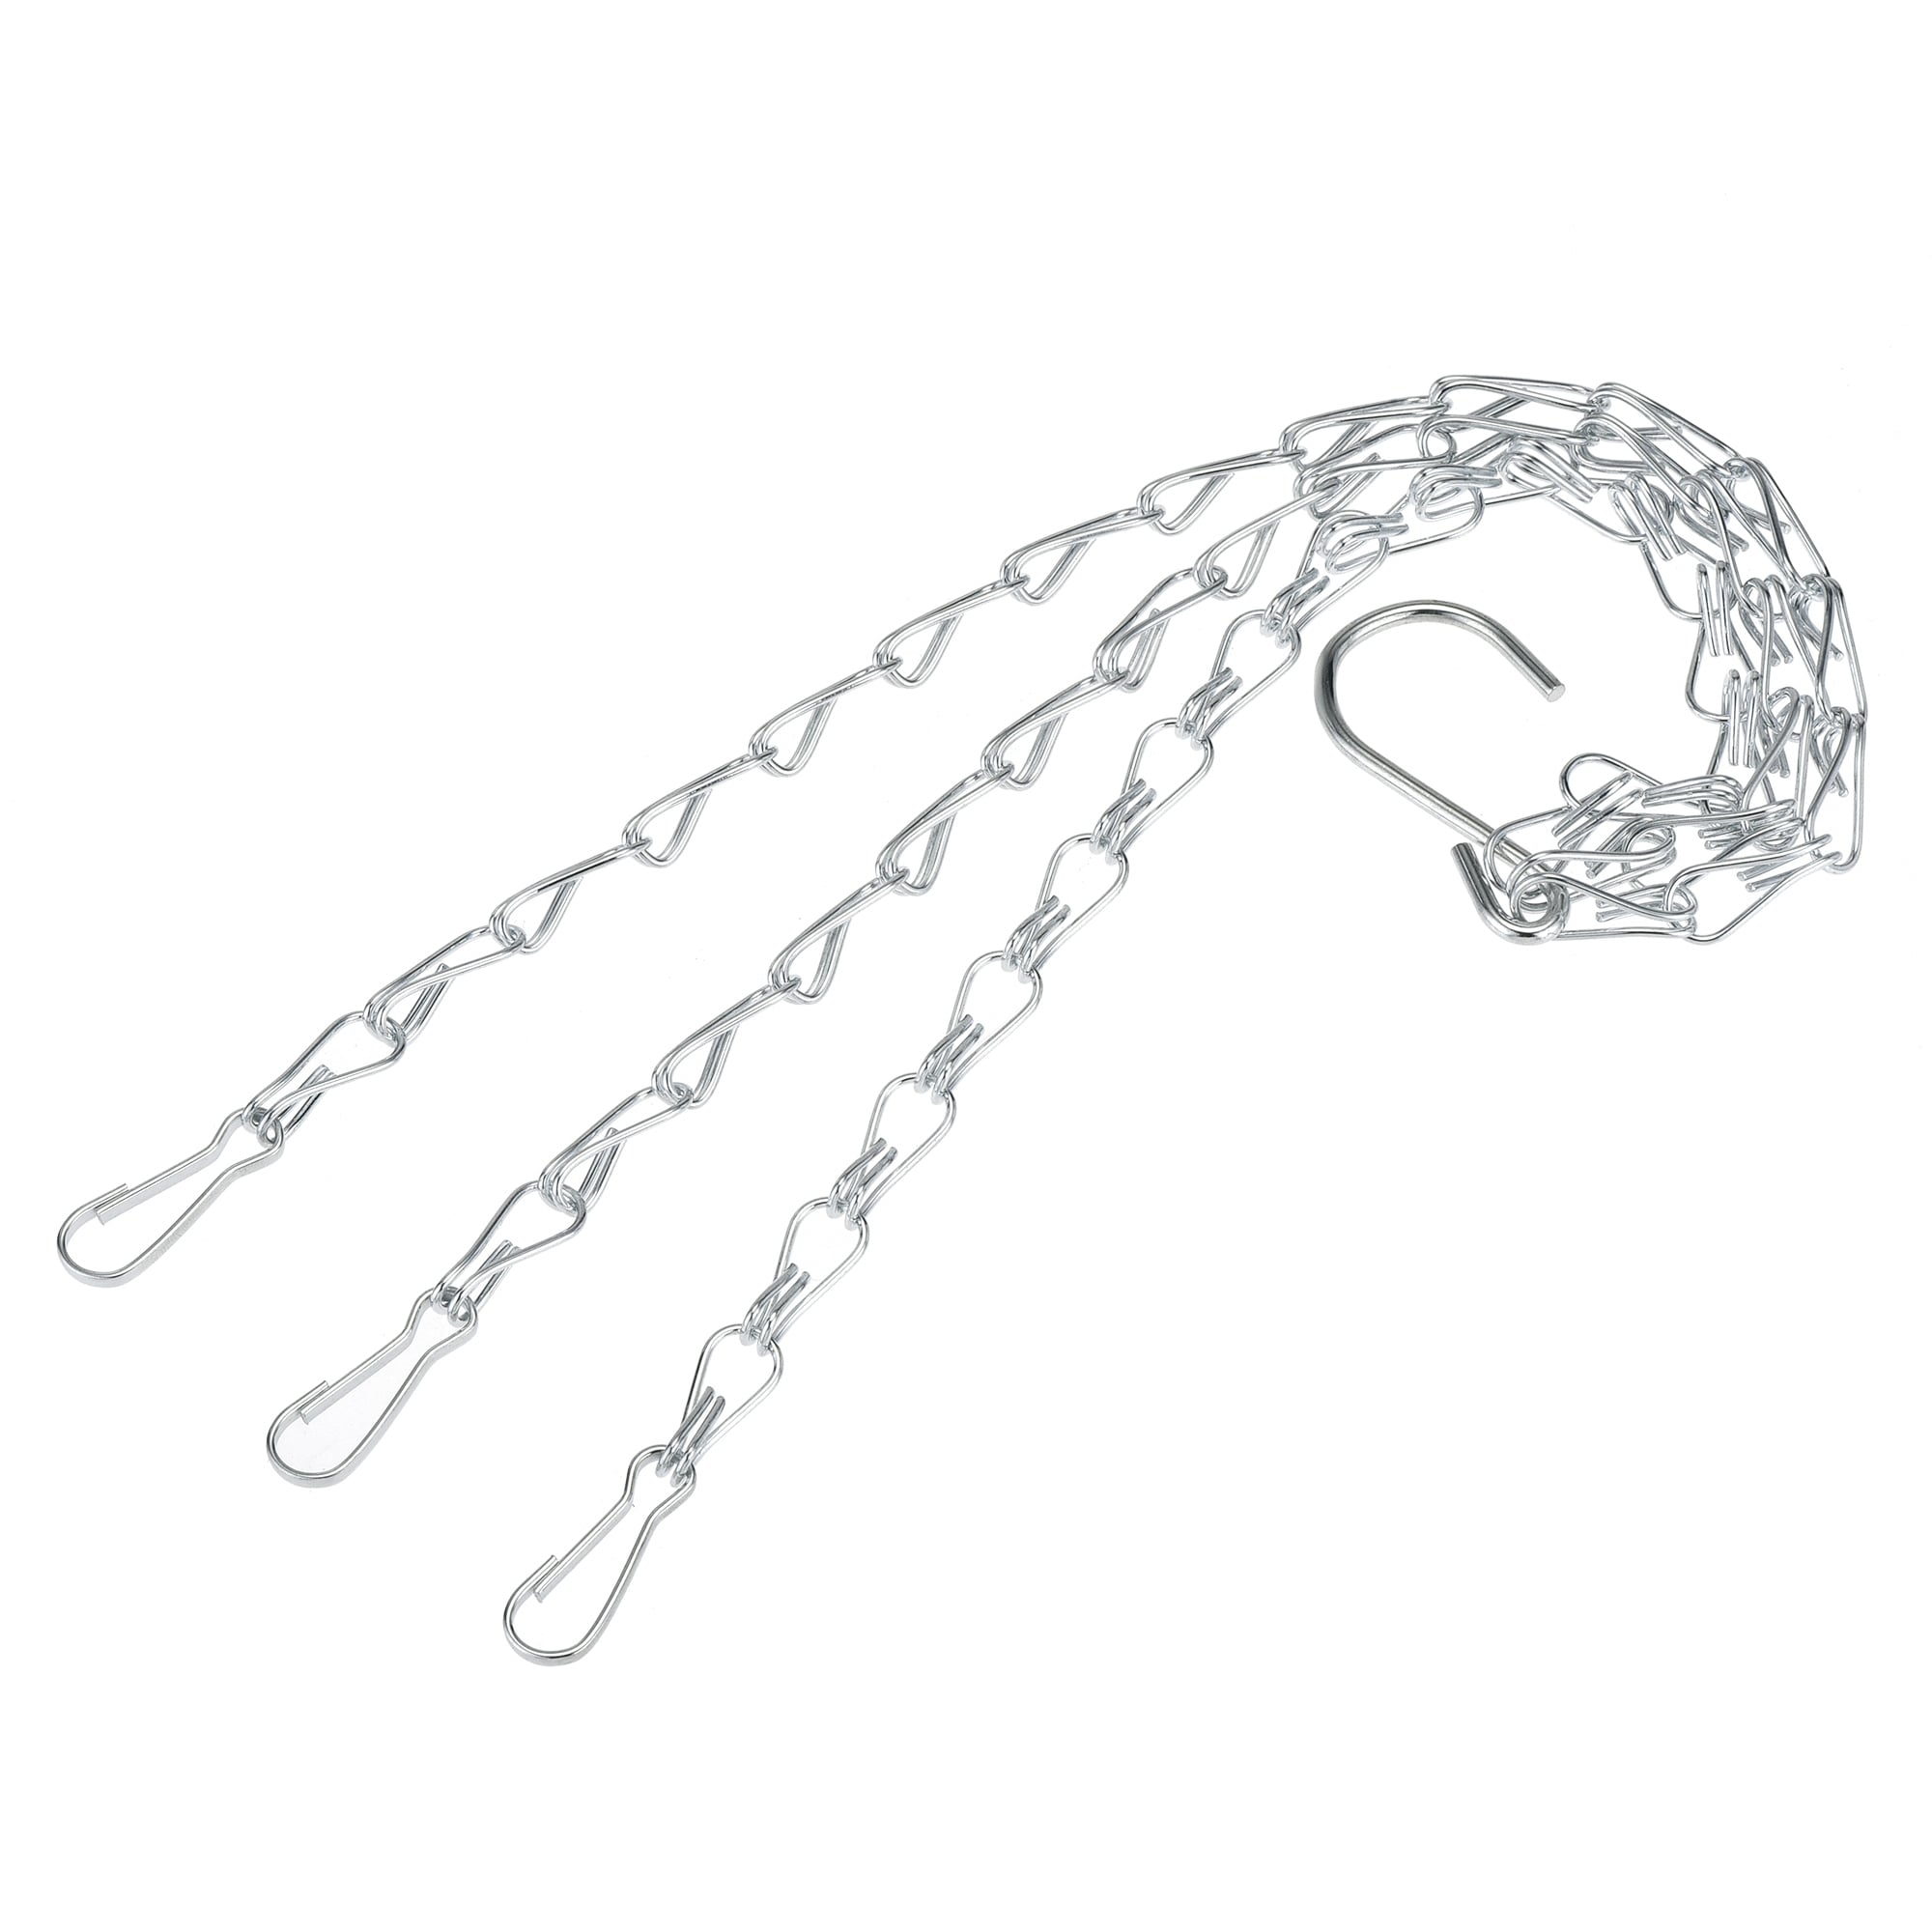 Hanging Chains 24cm Extension Chain Link with S-Shaped Hooks 6Pcs